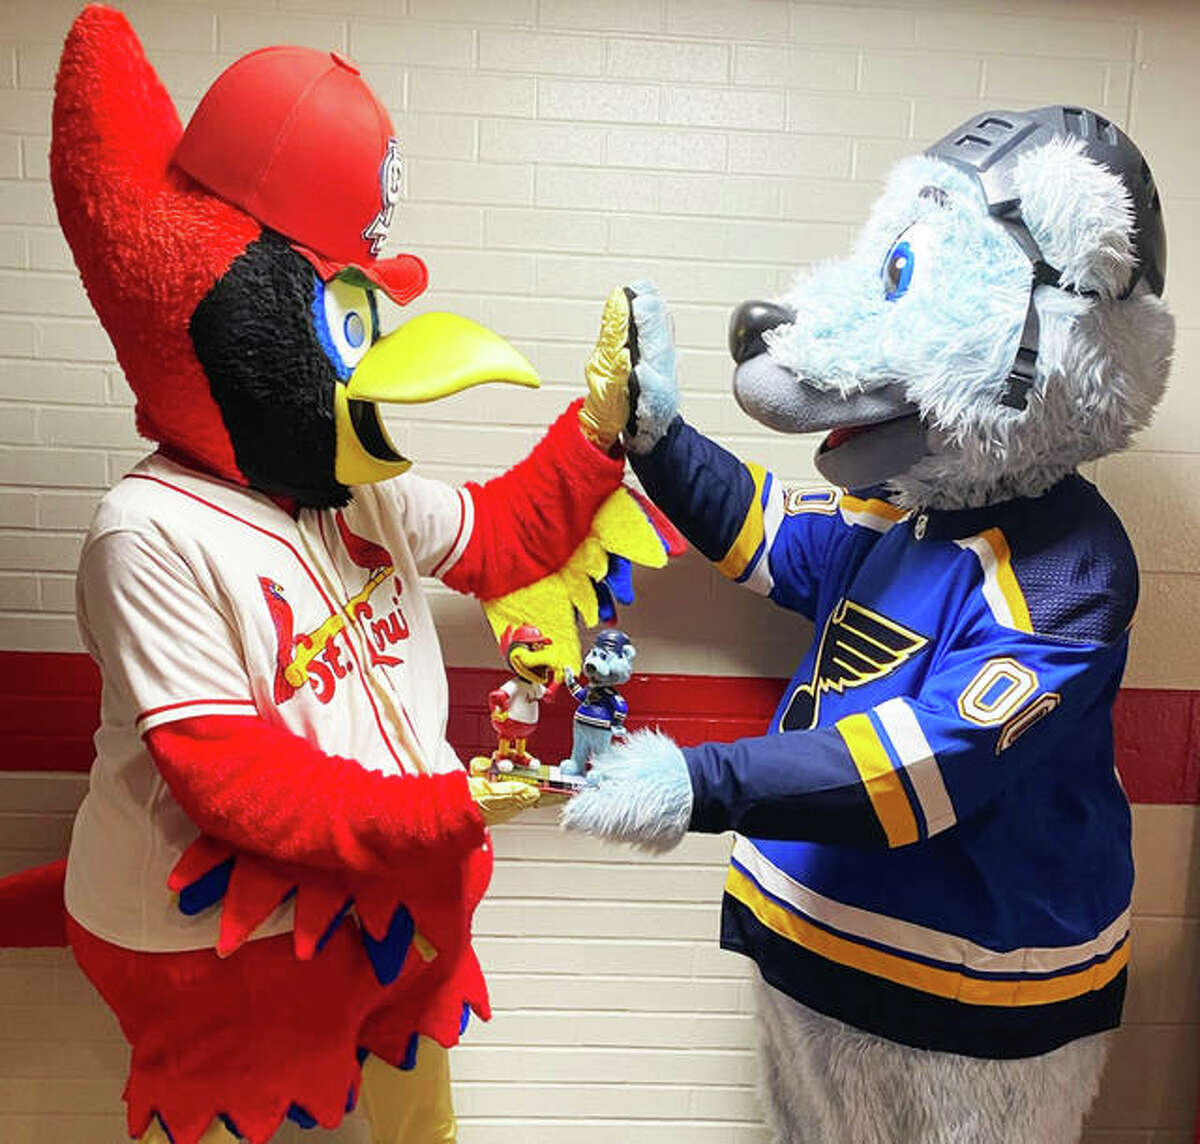 Over the weekend, St. Louis Cardinals’ Fredbird and St. Louis Blues’ Louie got together and received their dual bobblehead. “They both loved it!” exclaimed the National Bobblehead Hall of Fame and Museum’s Phil Sklar, co-founder and chief executive officer of the Milwaukee, Wisconsin-based organization.